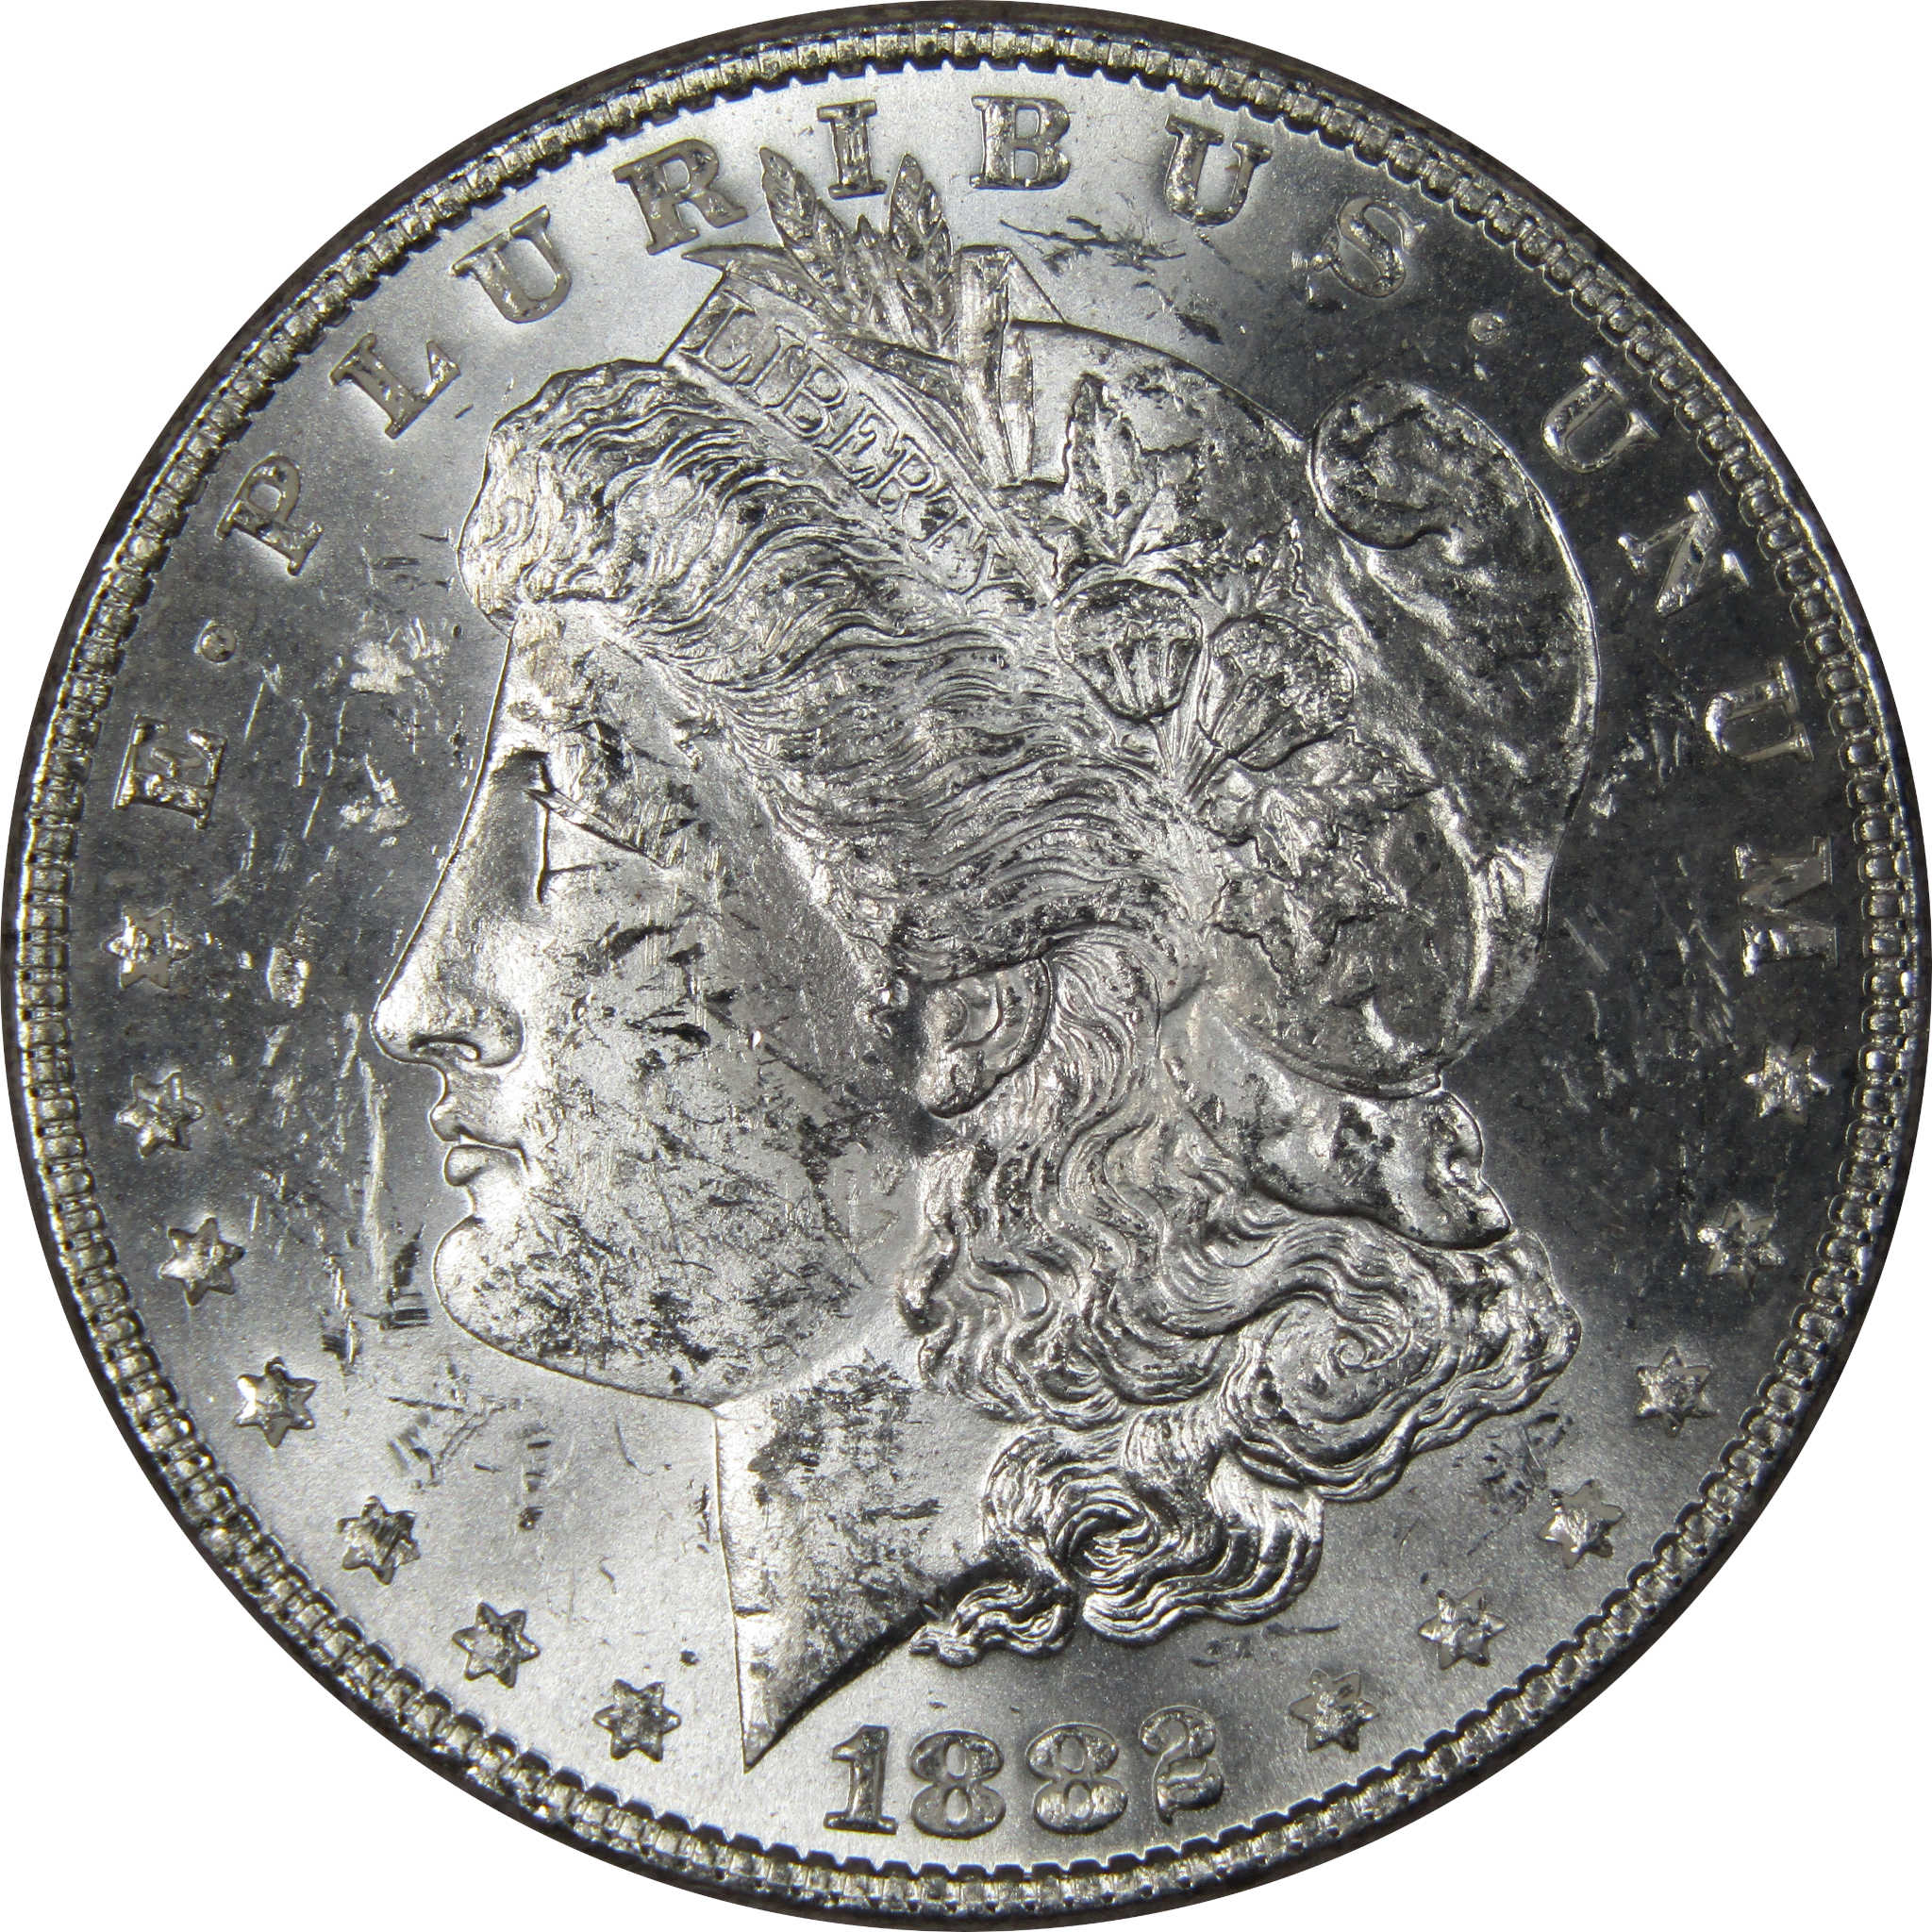 1882 Morgan Dollar BU Uncirculated Mint State 90% Silver SKU:IPC9671 - Morgan coin - Morgan silver dollar - Morgan silver dollar for sale - Profile Coins &amp; Collectibles